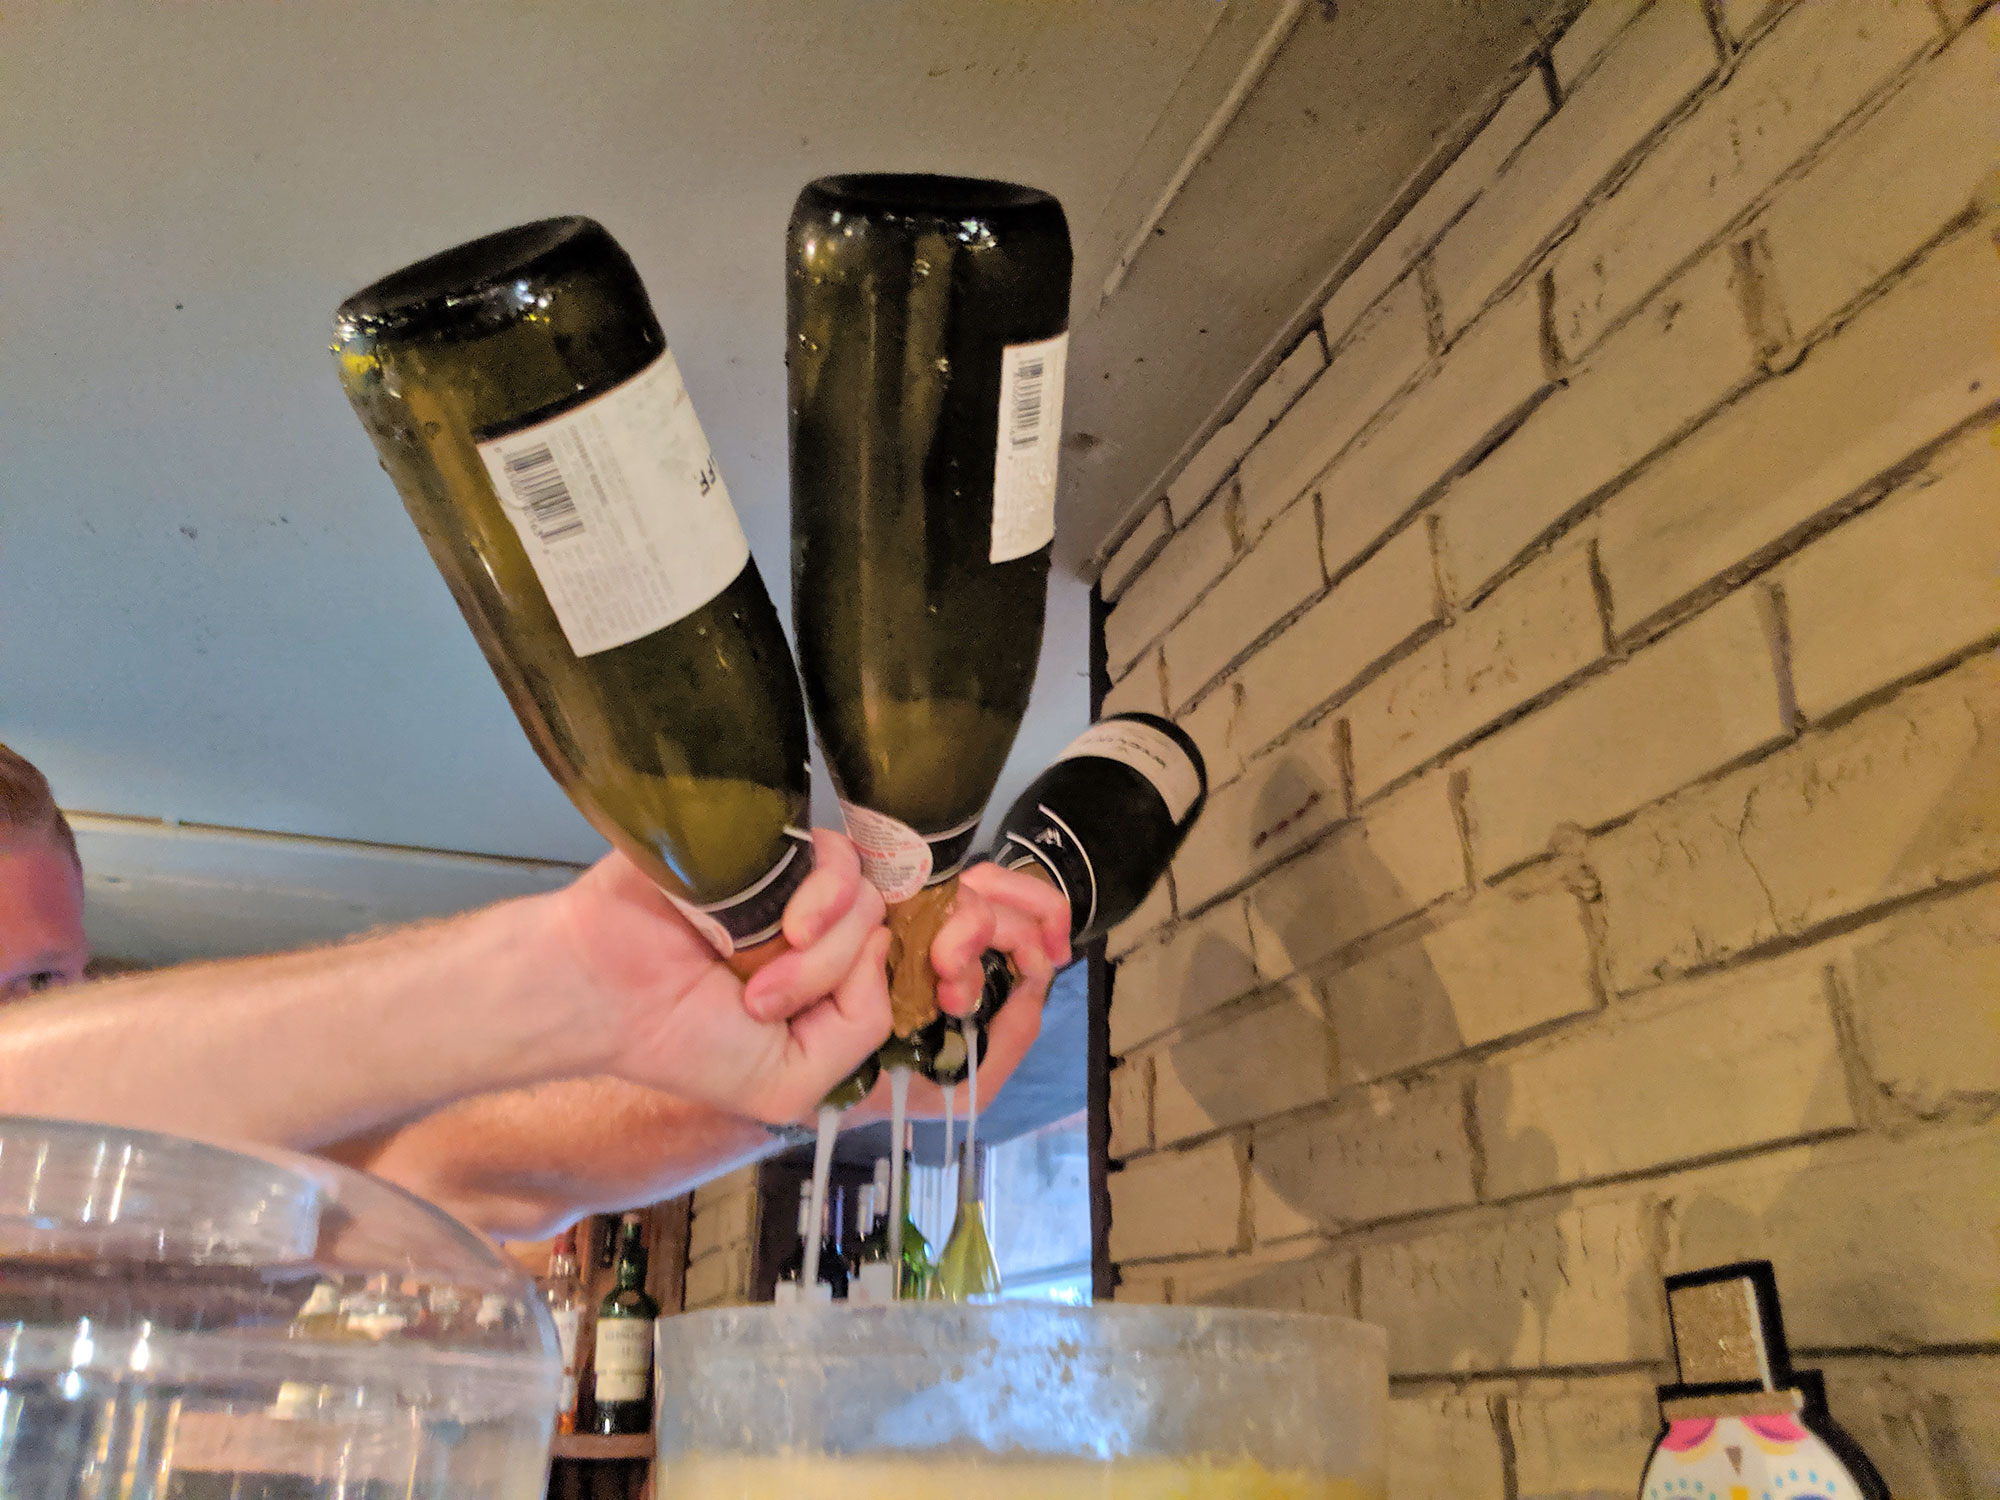 Champagne being poured at Points South Latin Kitchen drag brunch in Baltimore.